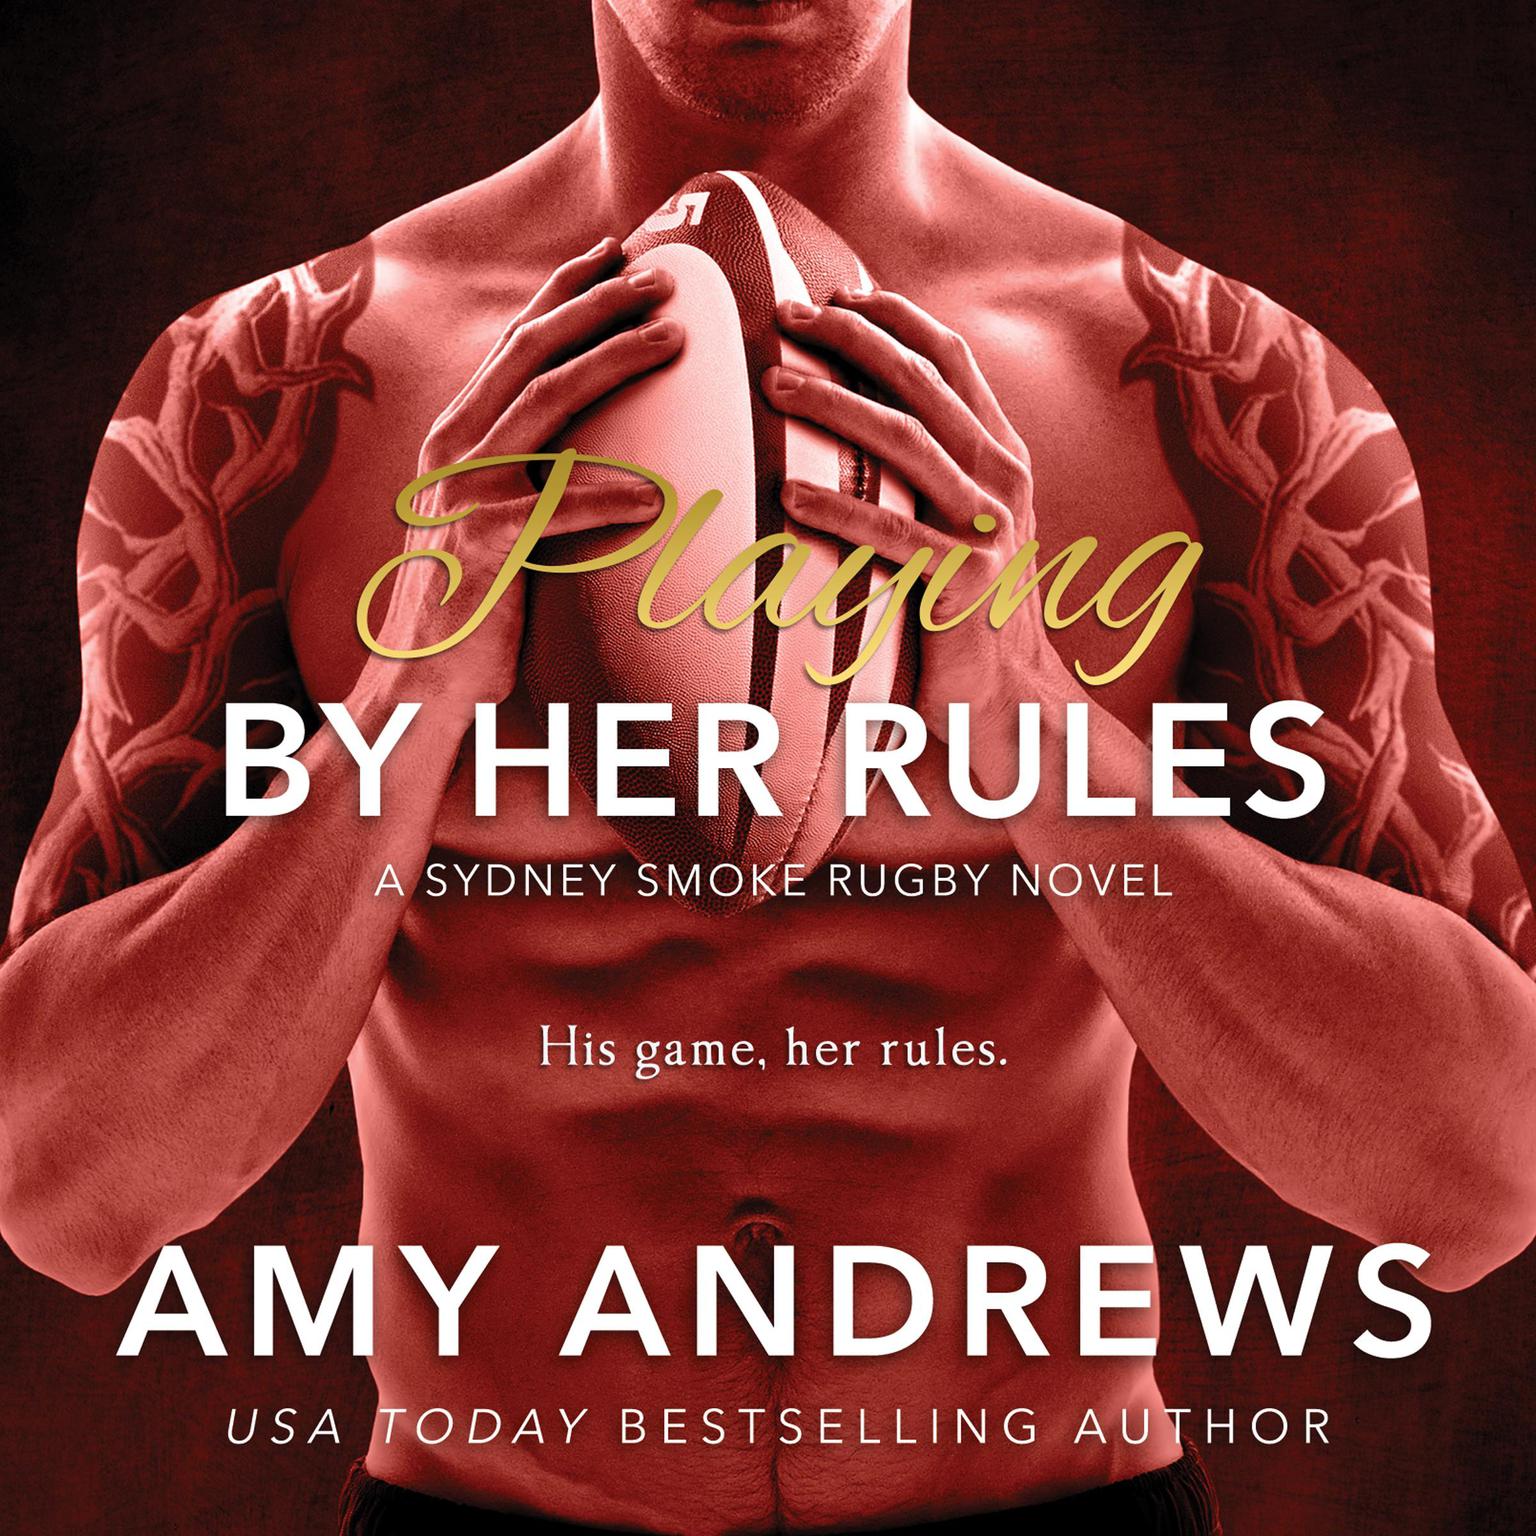 Playing by Her Rules Audiobook, by Amy Andrews